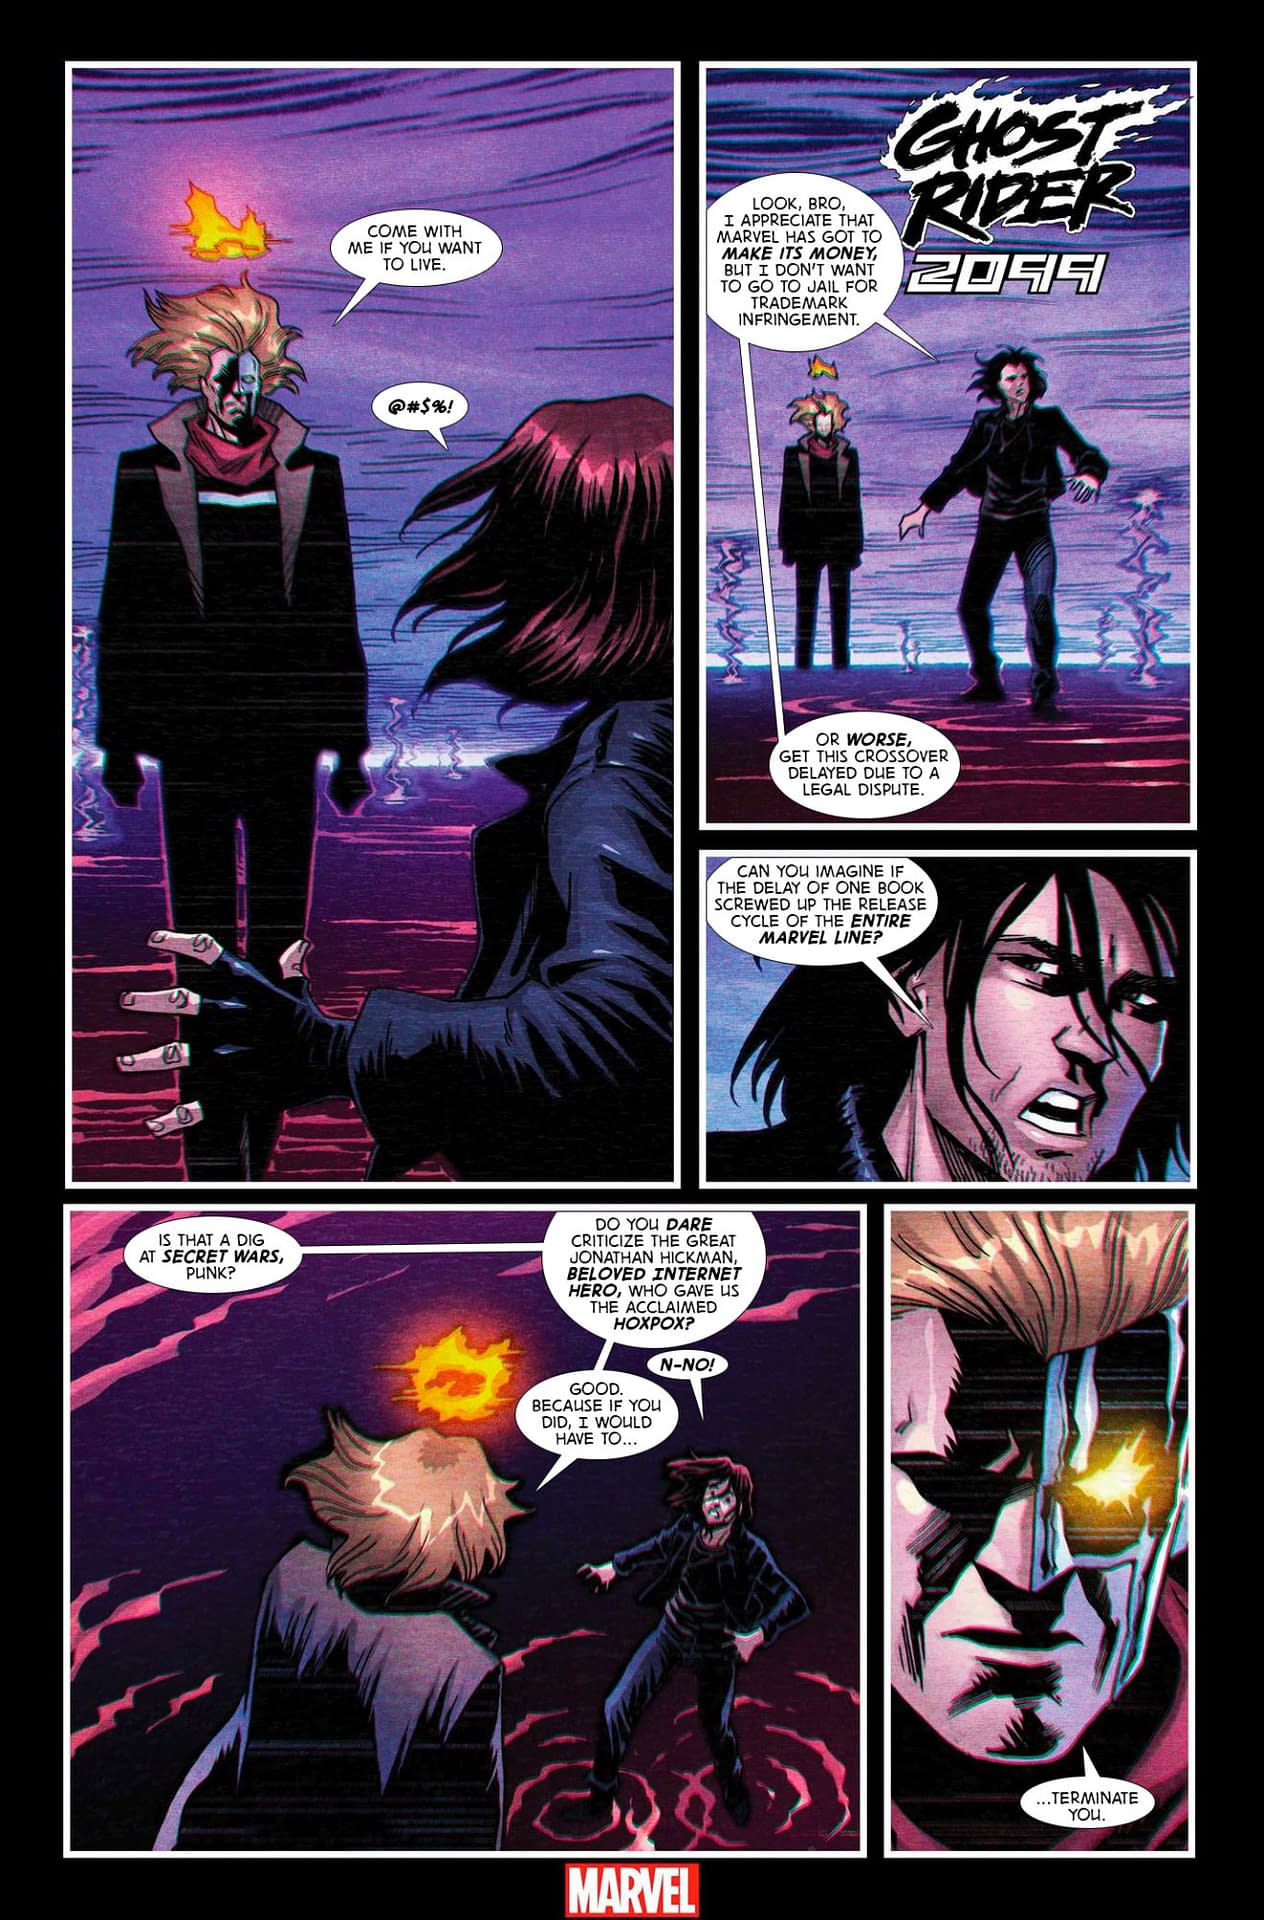 A Dark Fate for Ghost Rider 2099 #1 [Improbable Previews]